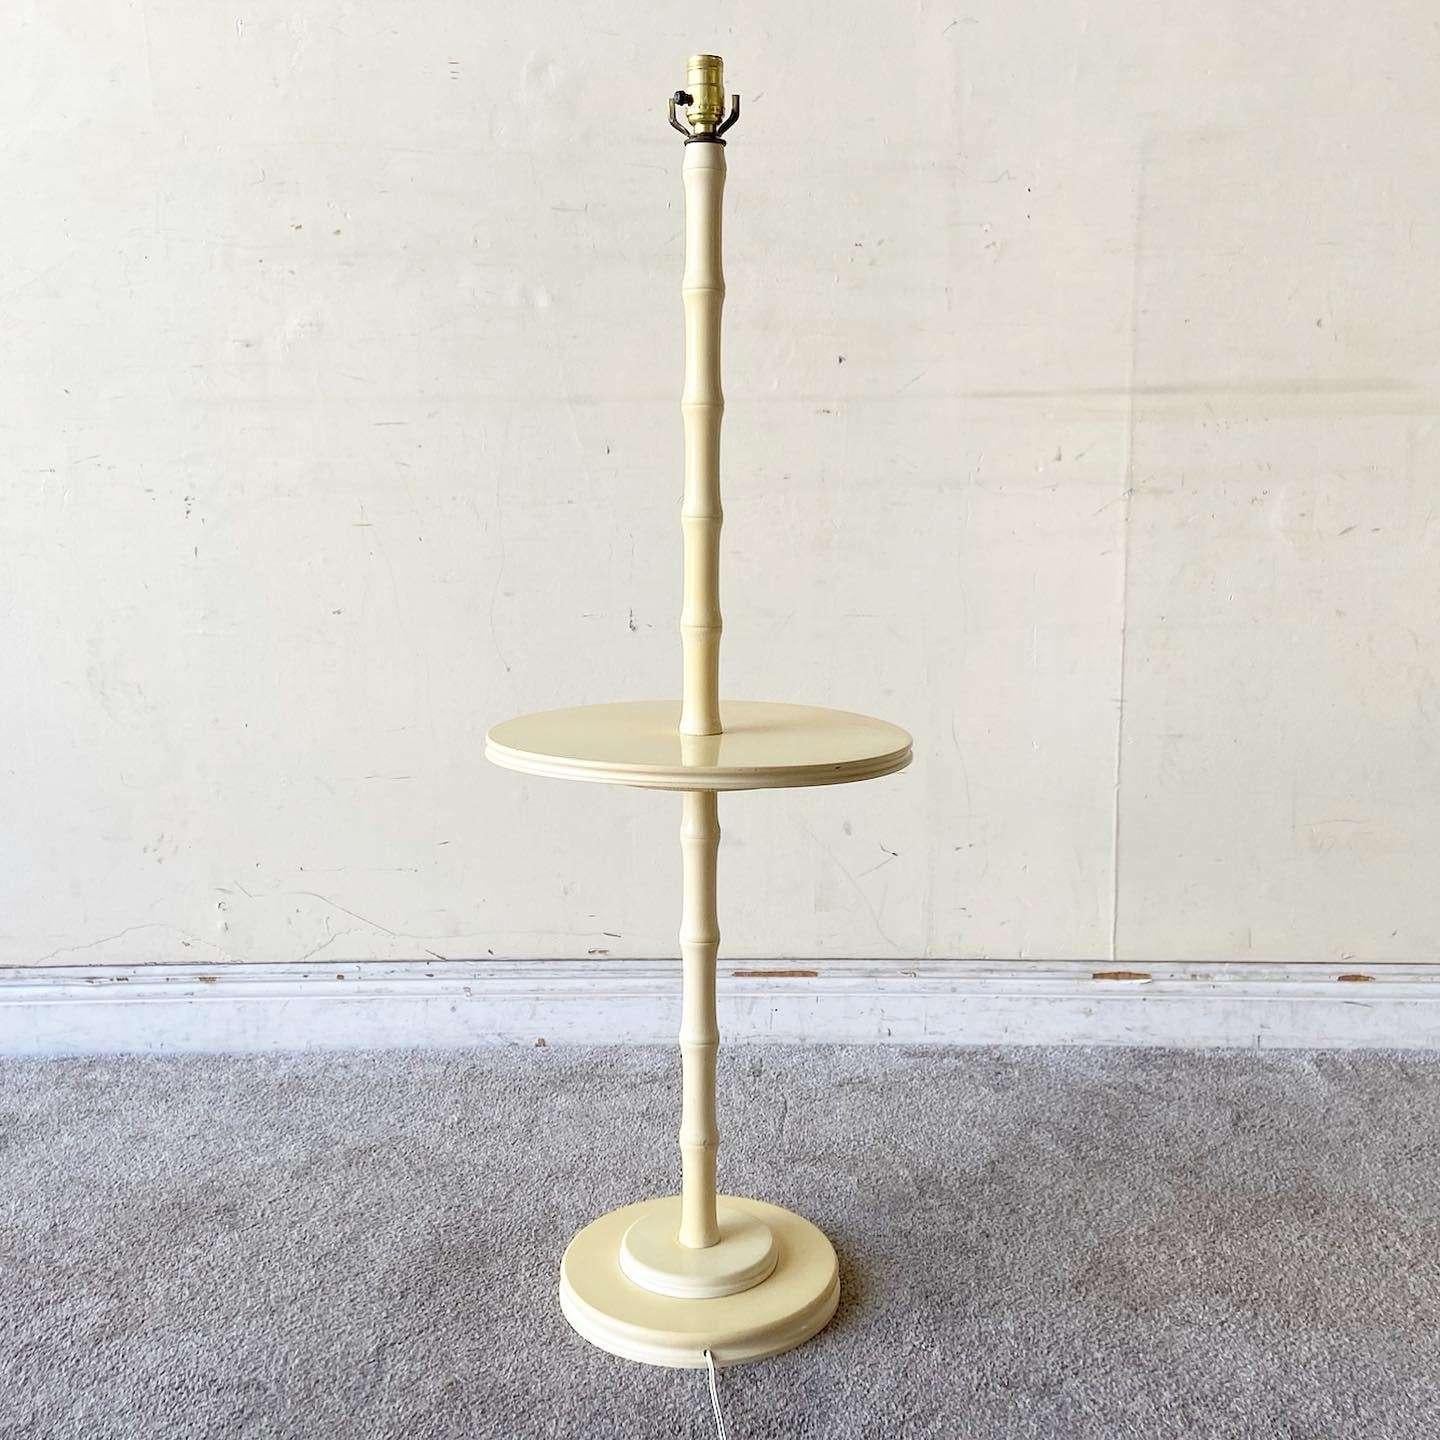 Exceptional vintage boho chic costal regency side table/floor lamp. Features a cream finish with a faux bamboo stem.

